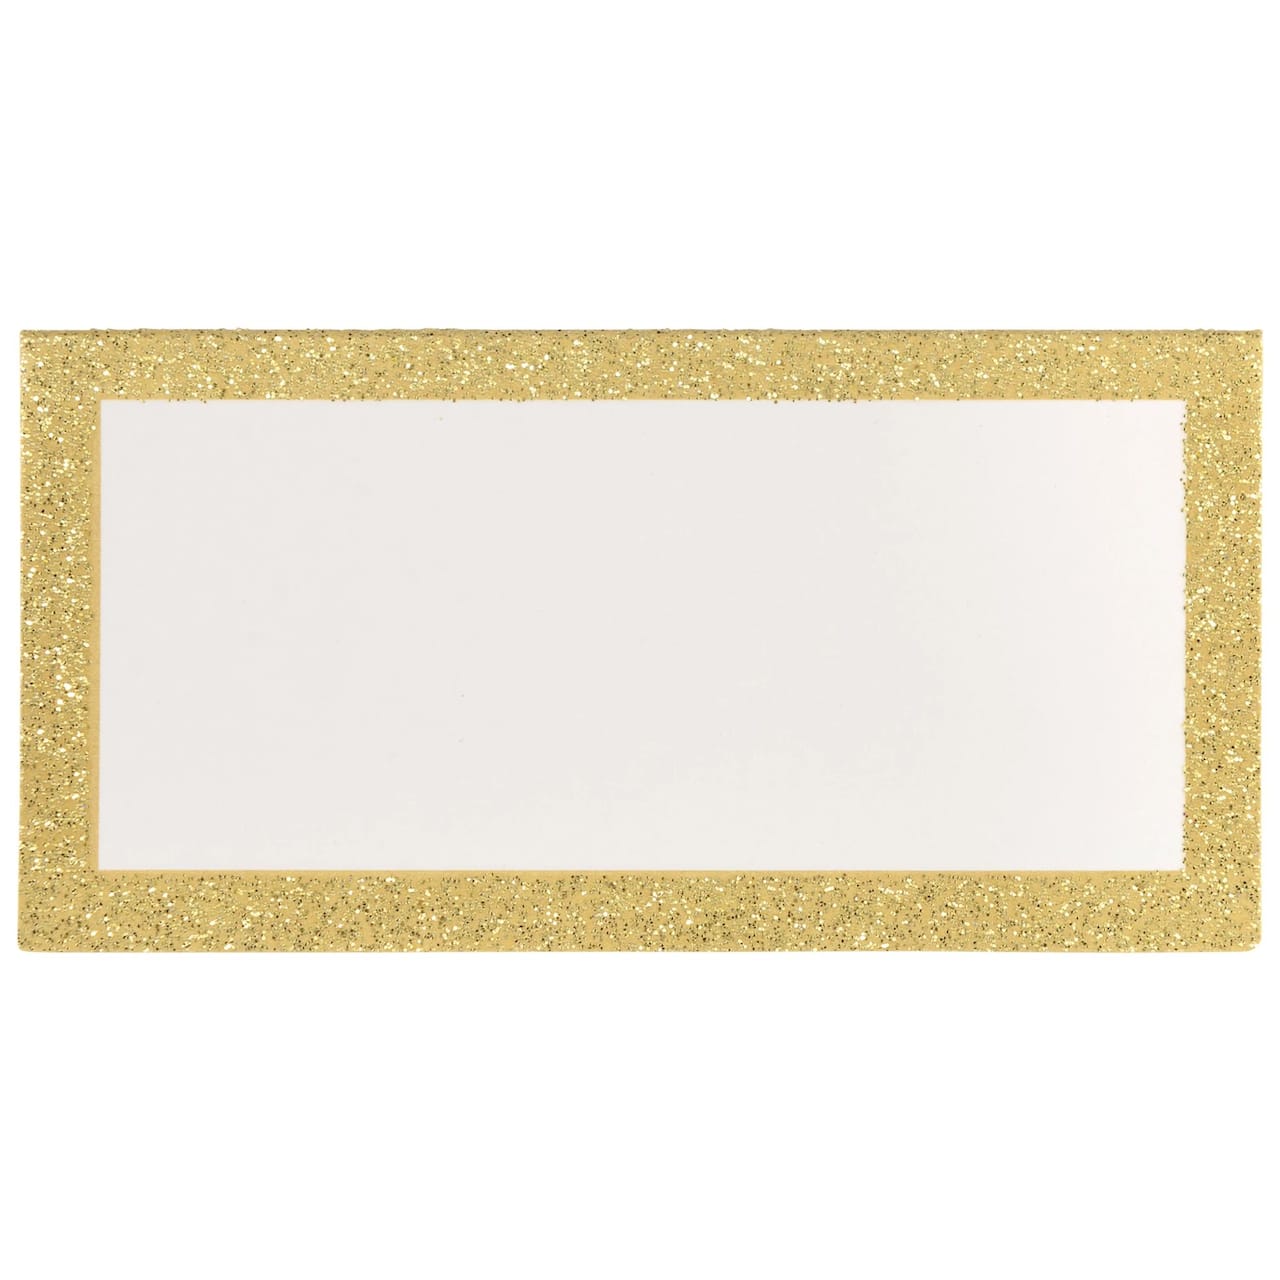 Gold Glitter Place Cards, 100ct.